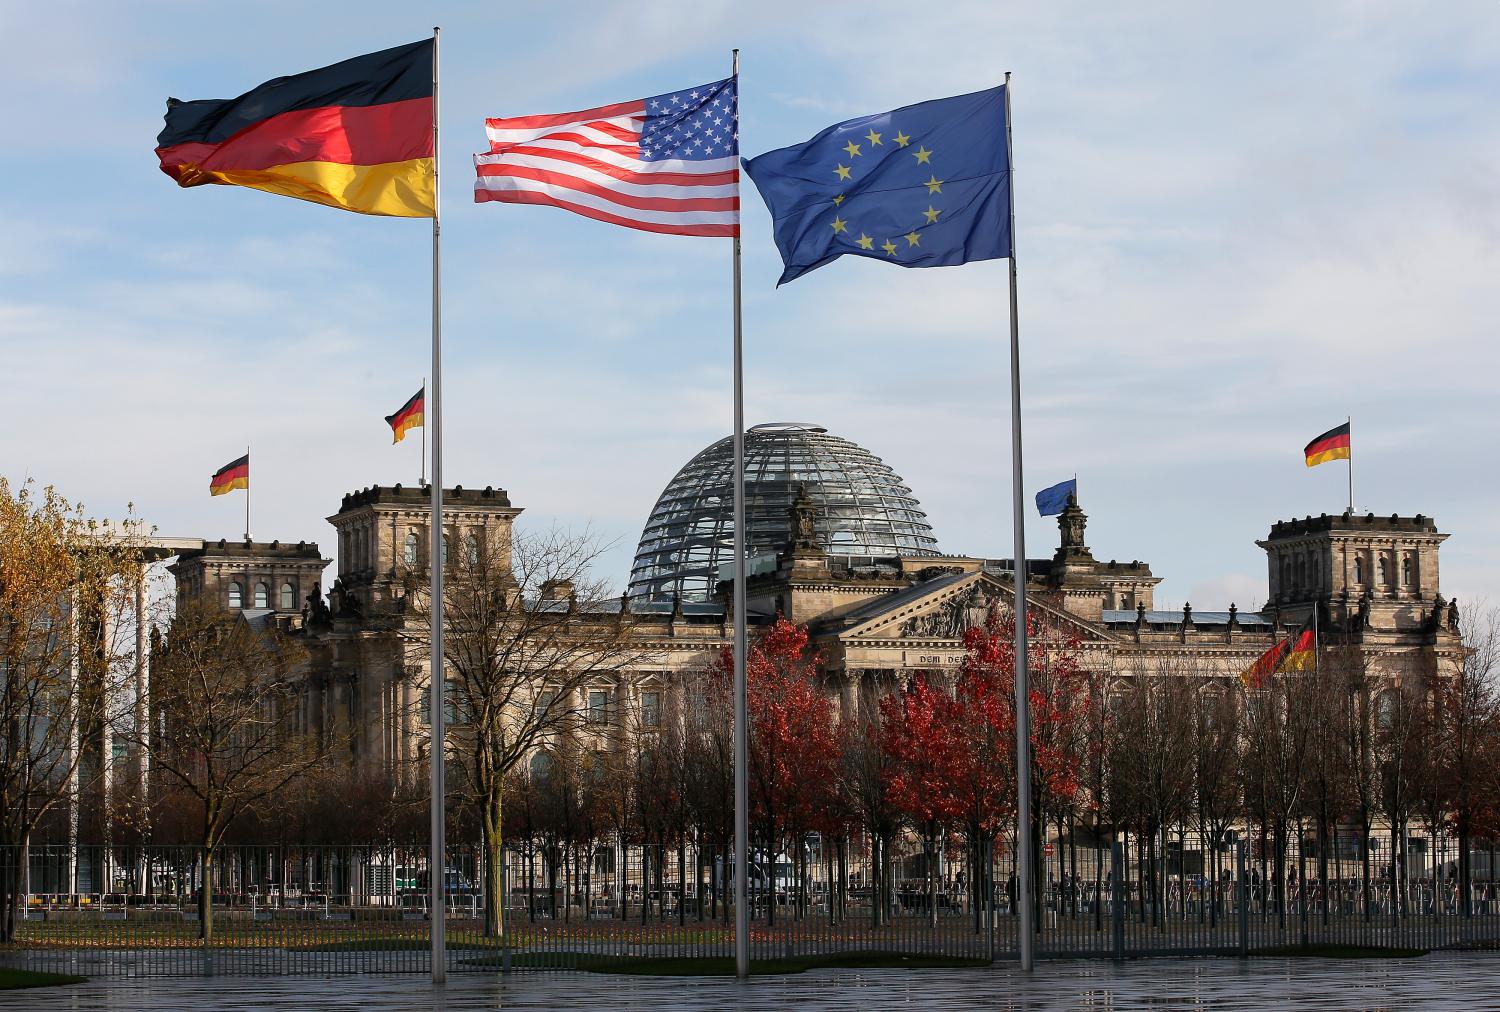 German, U.S. and EU flags fly in front of the Reichstag building ahead of the meeting between U.S. President Obama and German Chancellor Merkel in Berlin